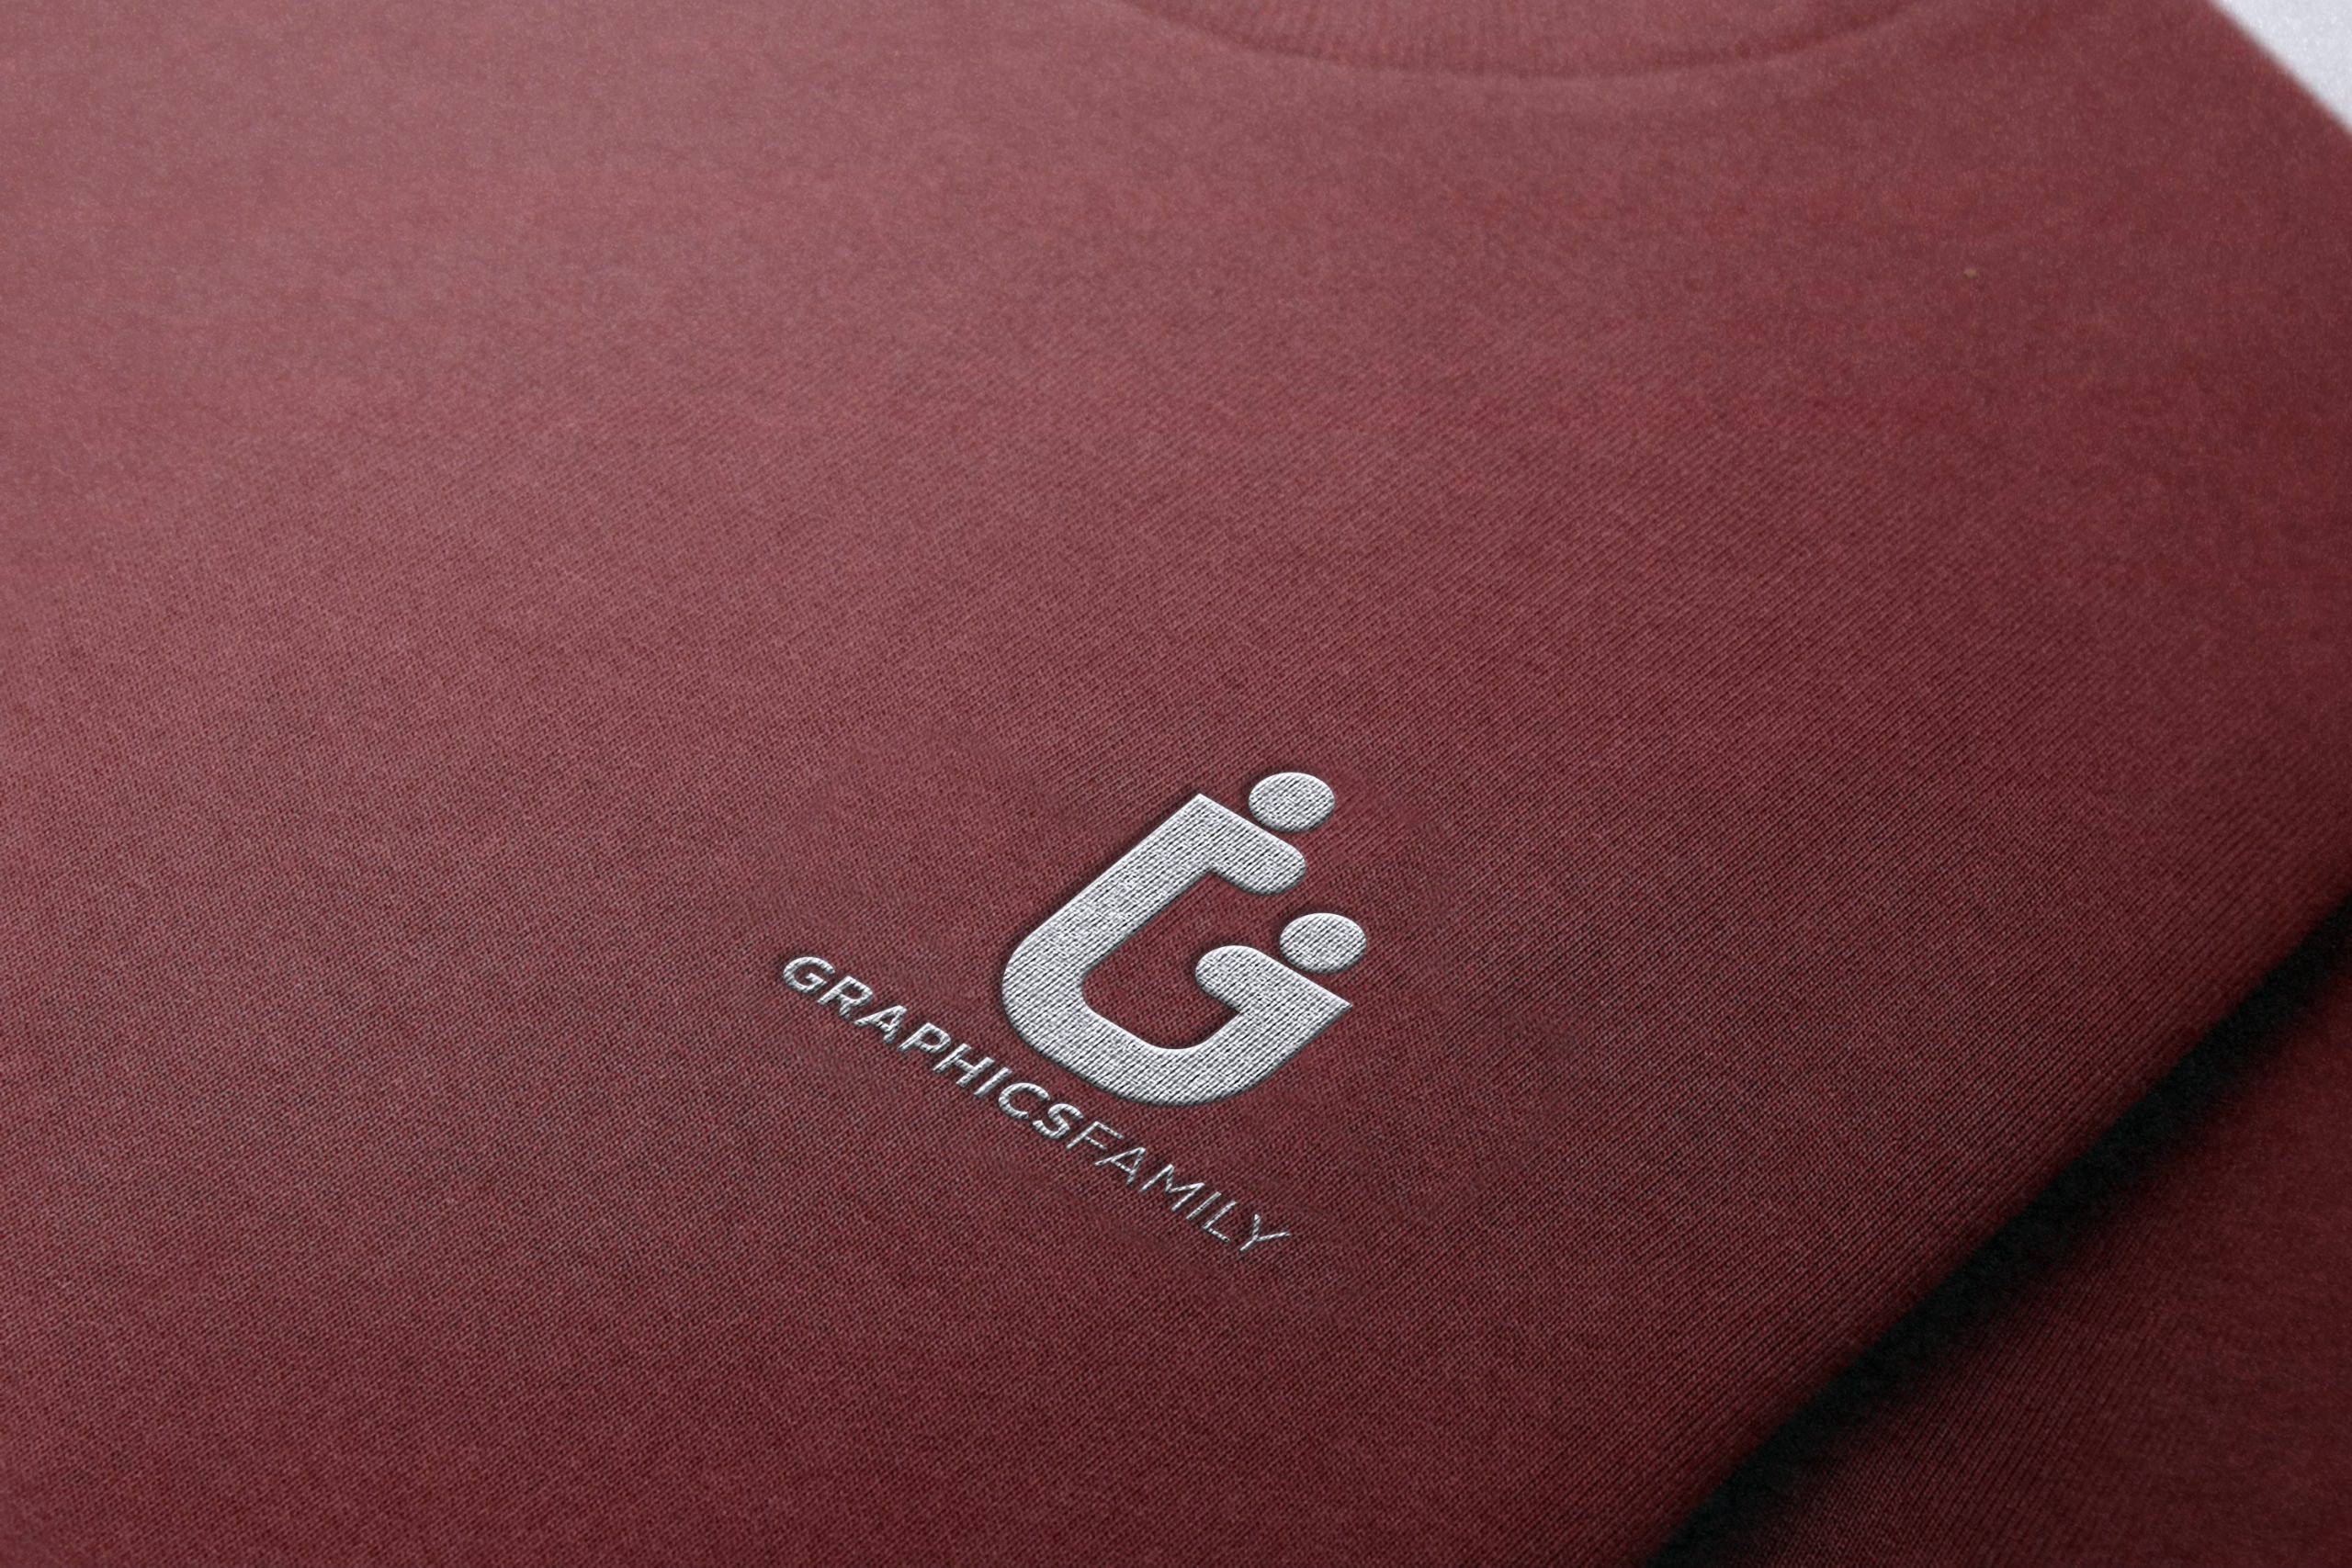 Free Clothing Textured Embroidered Logo Mockup